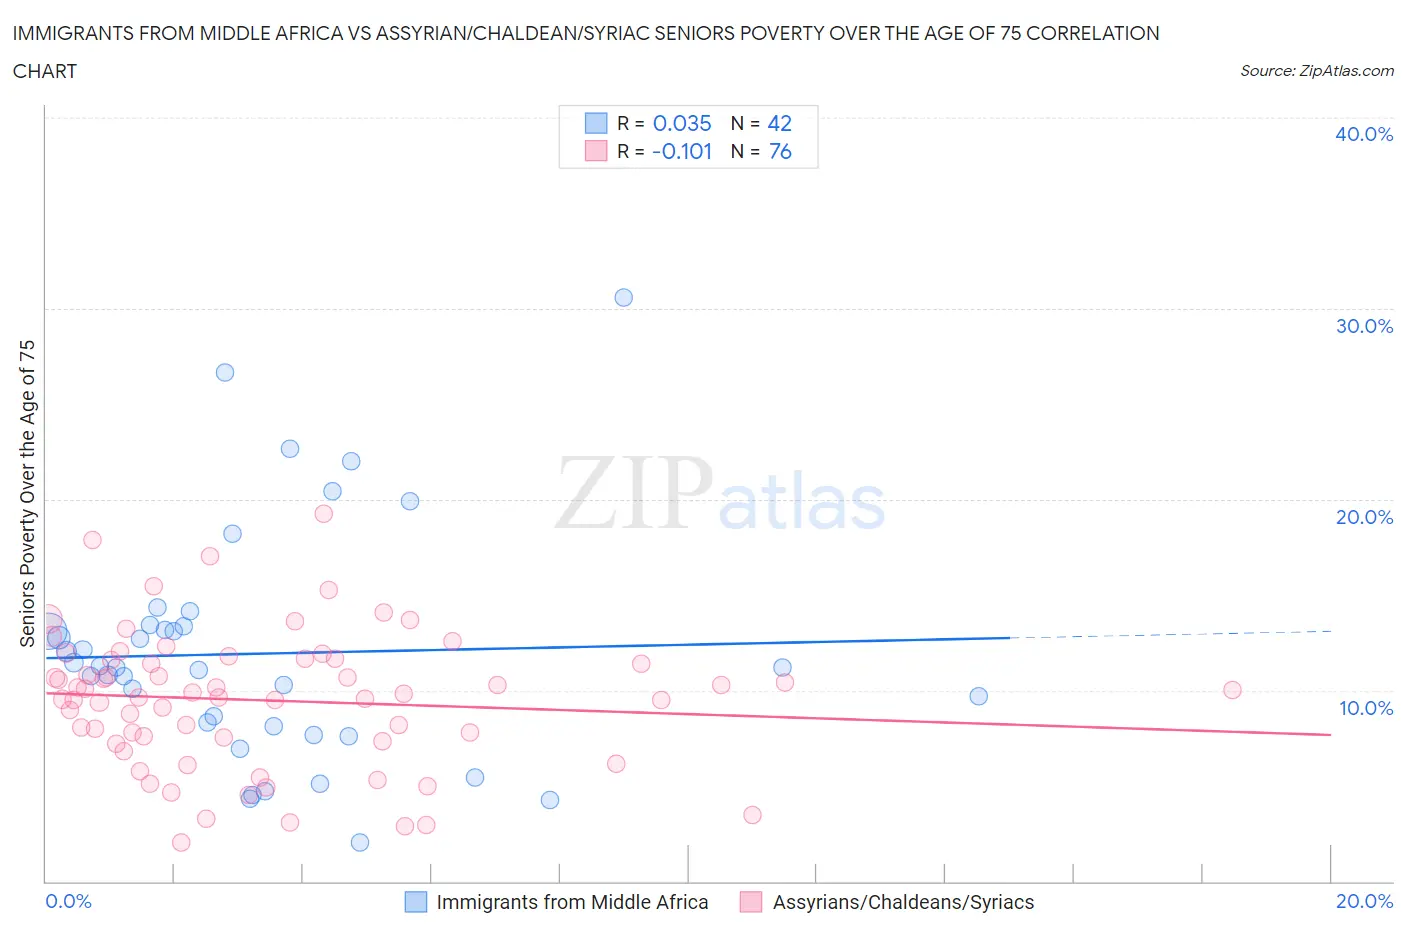 Immigrants from Middle Africa vs Assyrian/Chaldean/Syriac Seniors Poverty Over the Age of 75